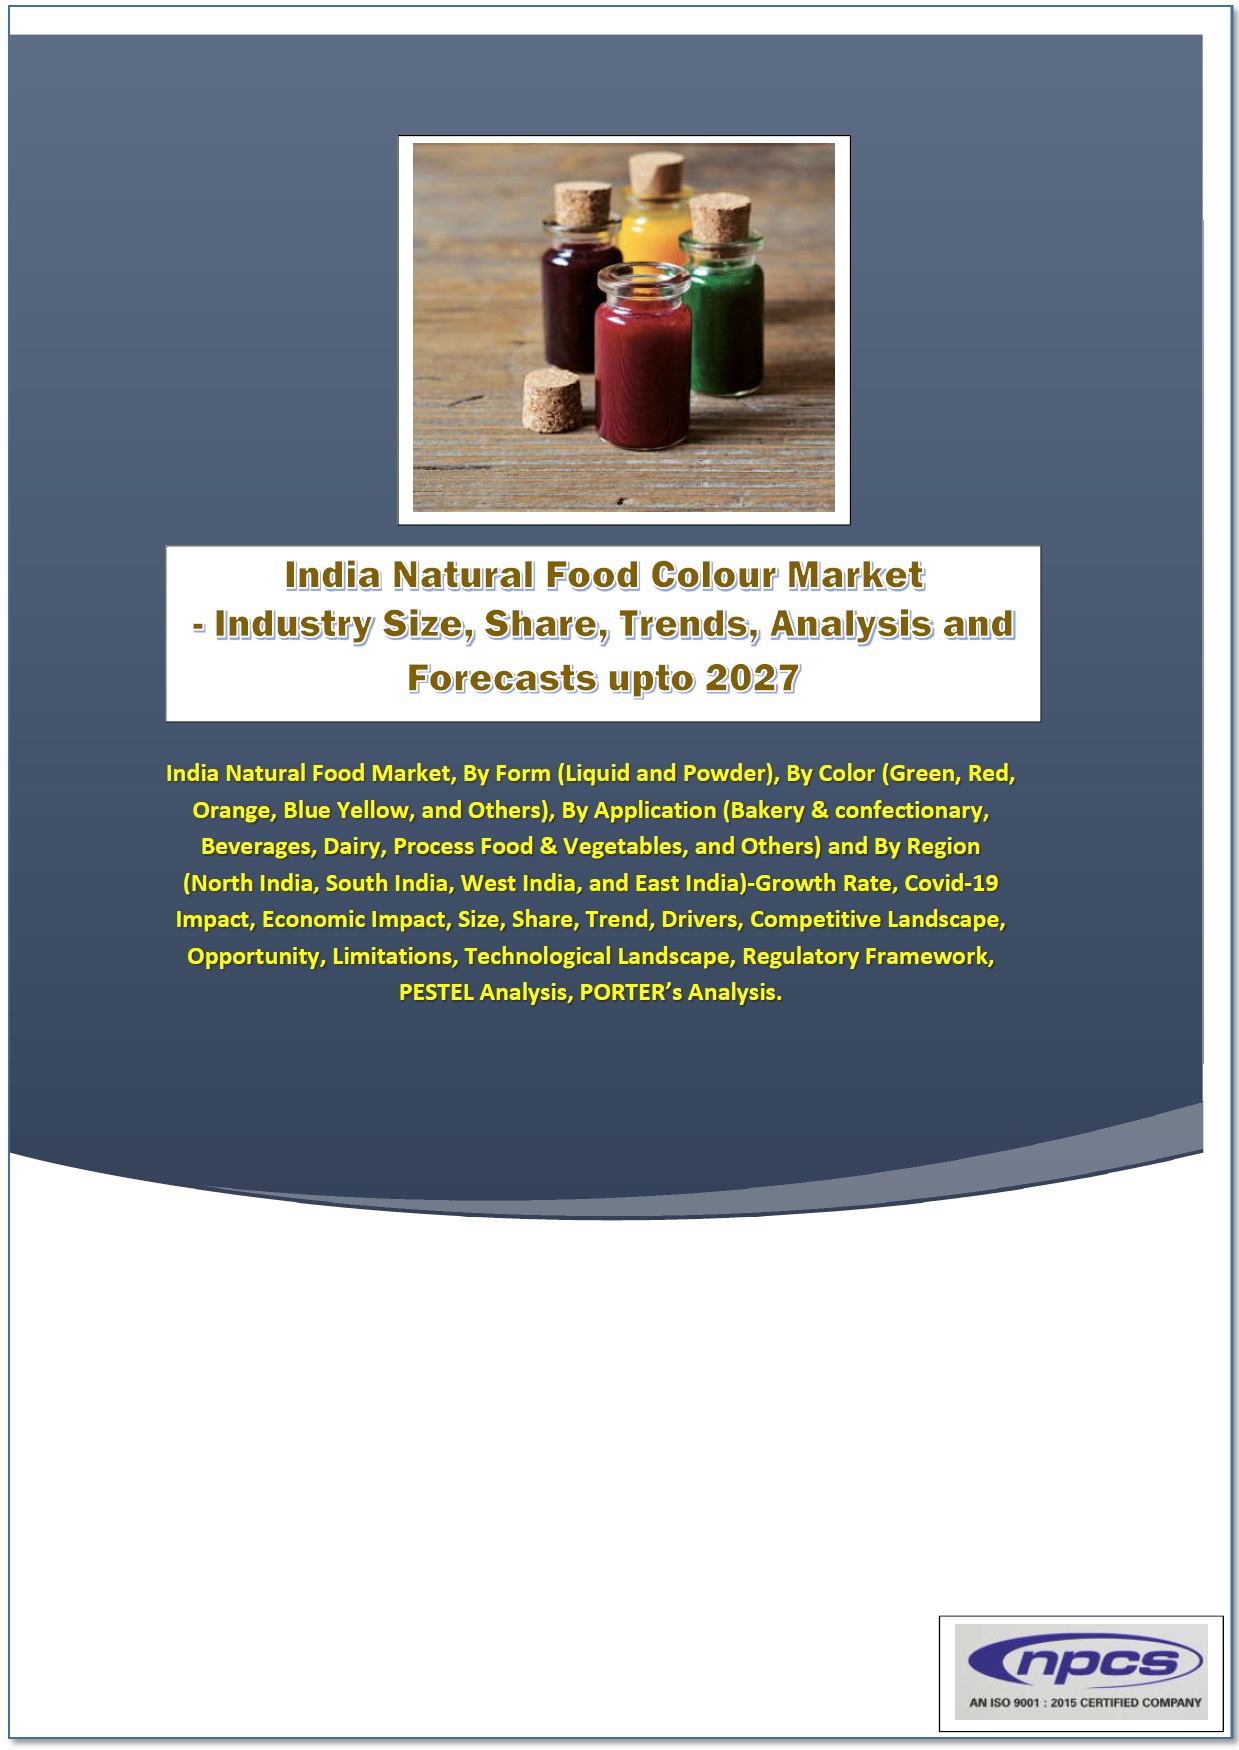 India Natural Food Colour Market - Industry Size, Share, Trends, Analysis and Forecasts upto 2027